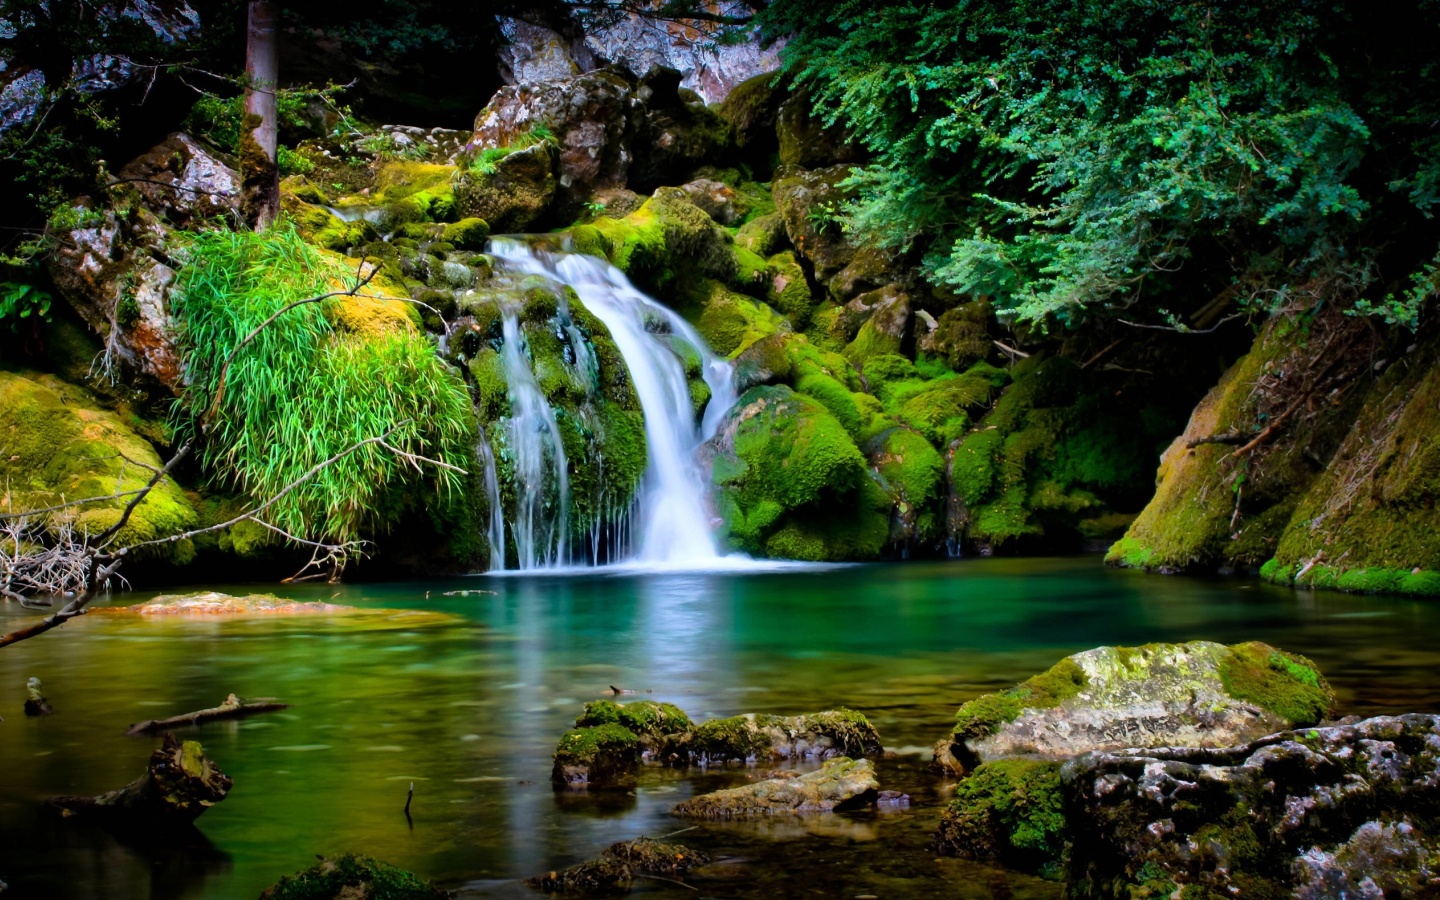  Laptop Hd Wallpapers for Windows 7 Free Download Laptop Nature